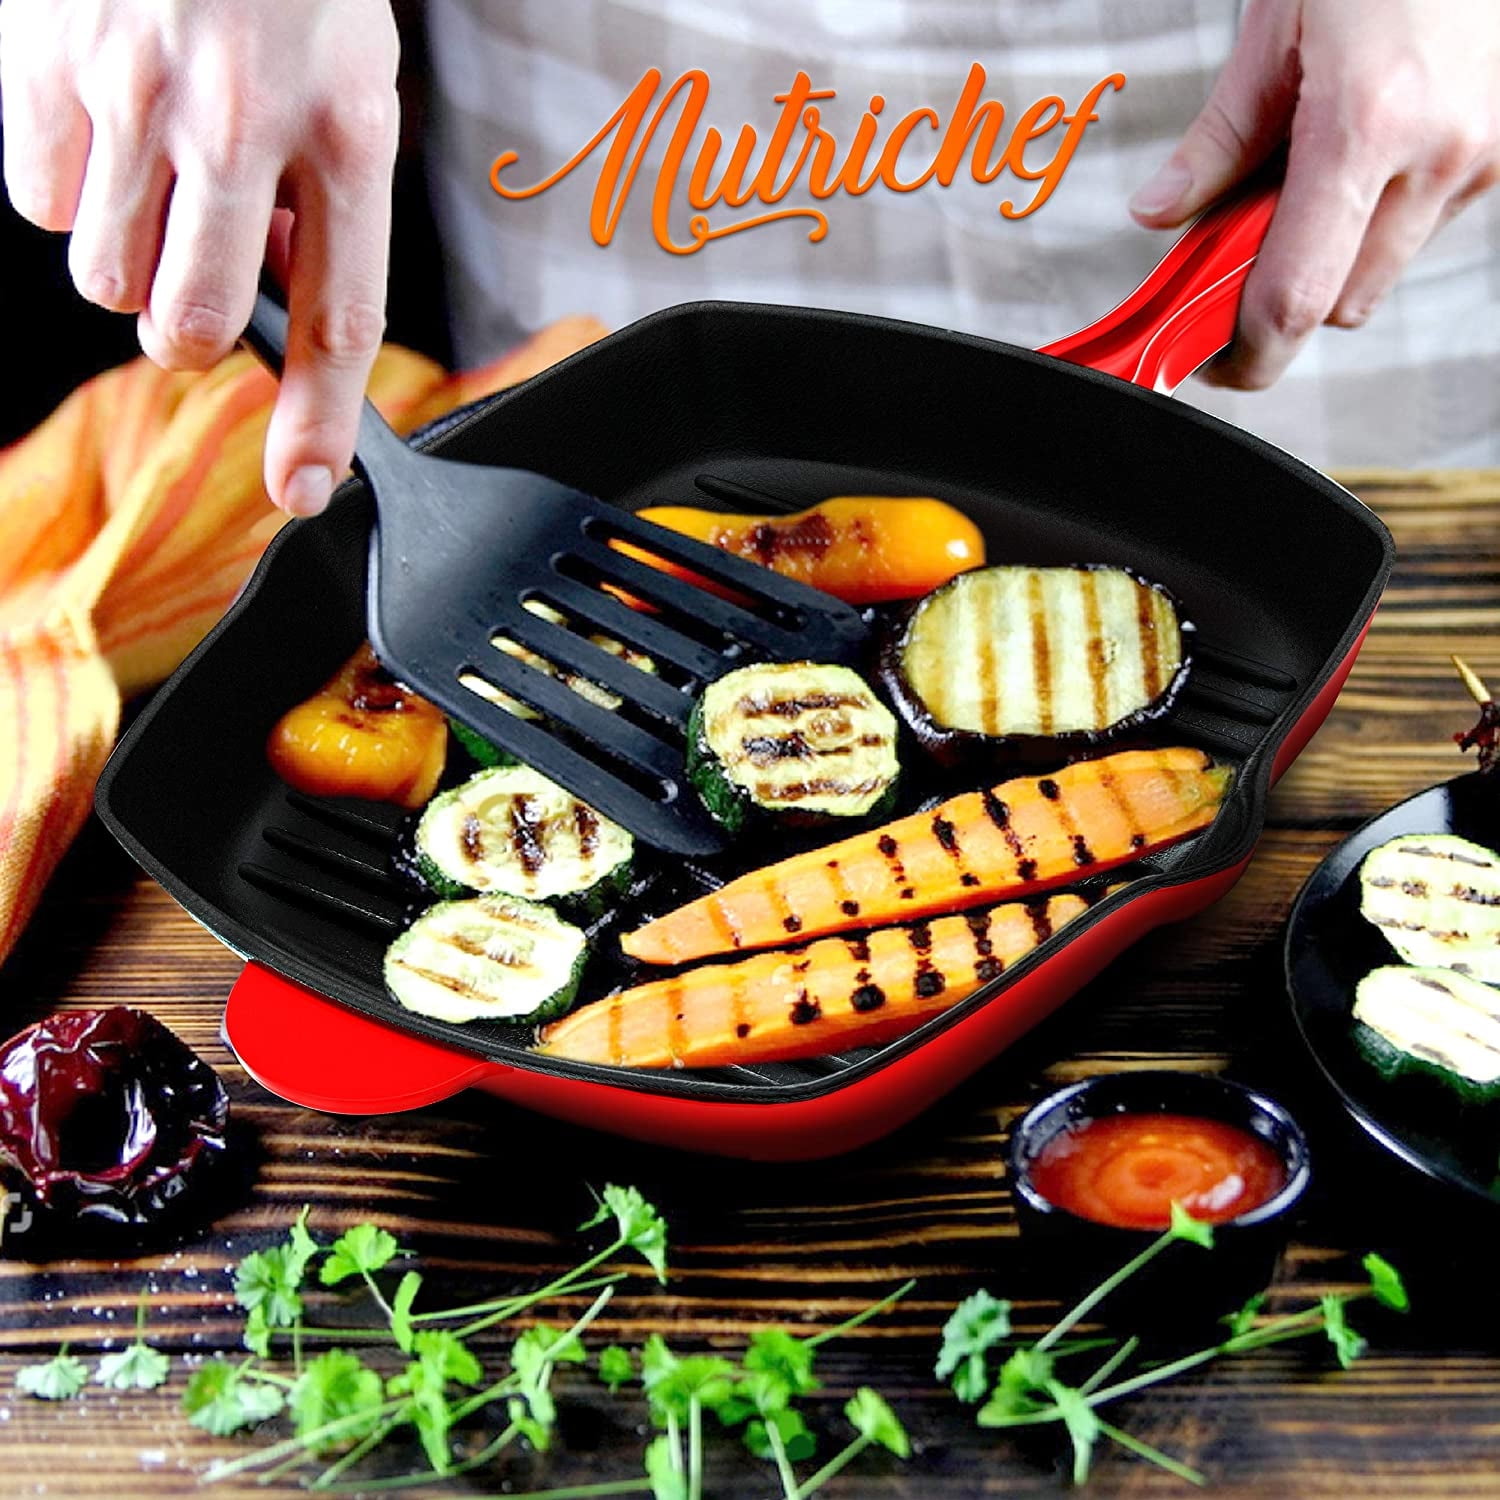 This Le Creuset square grill pan is perfect for small kitchens